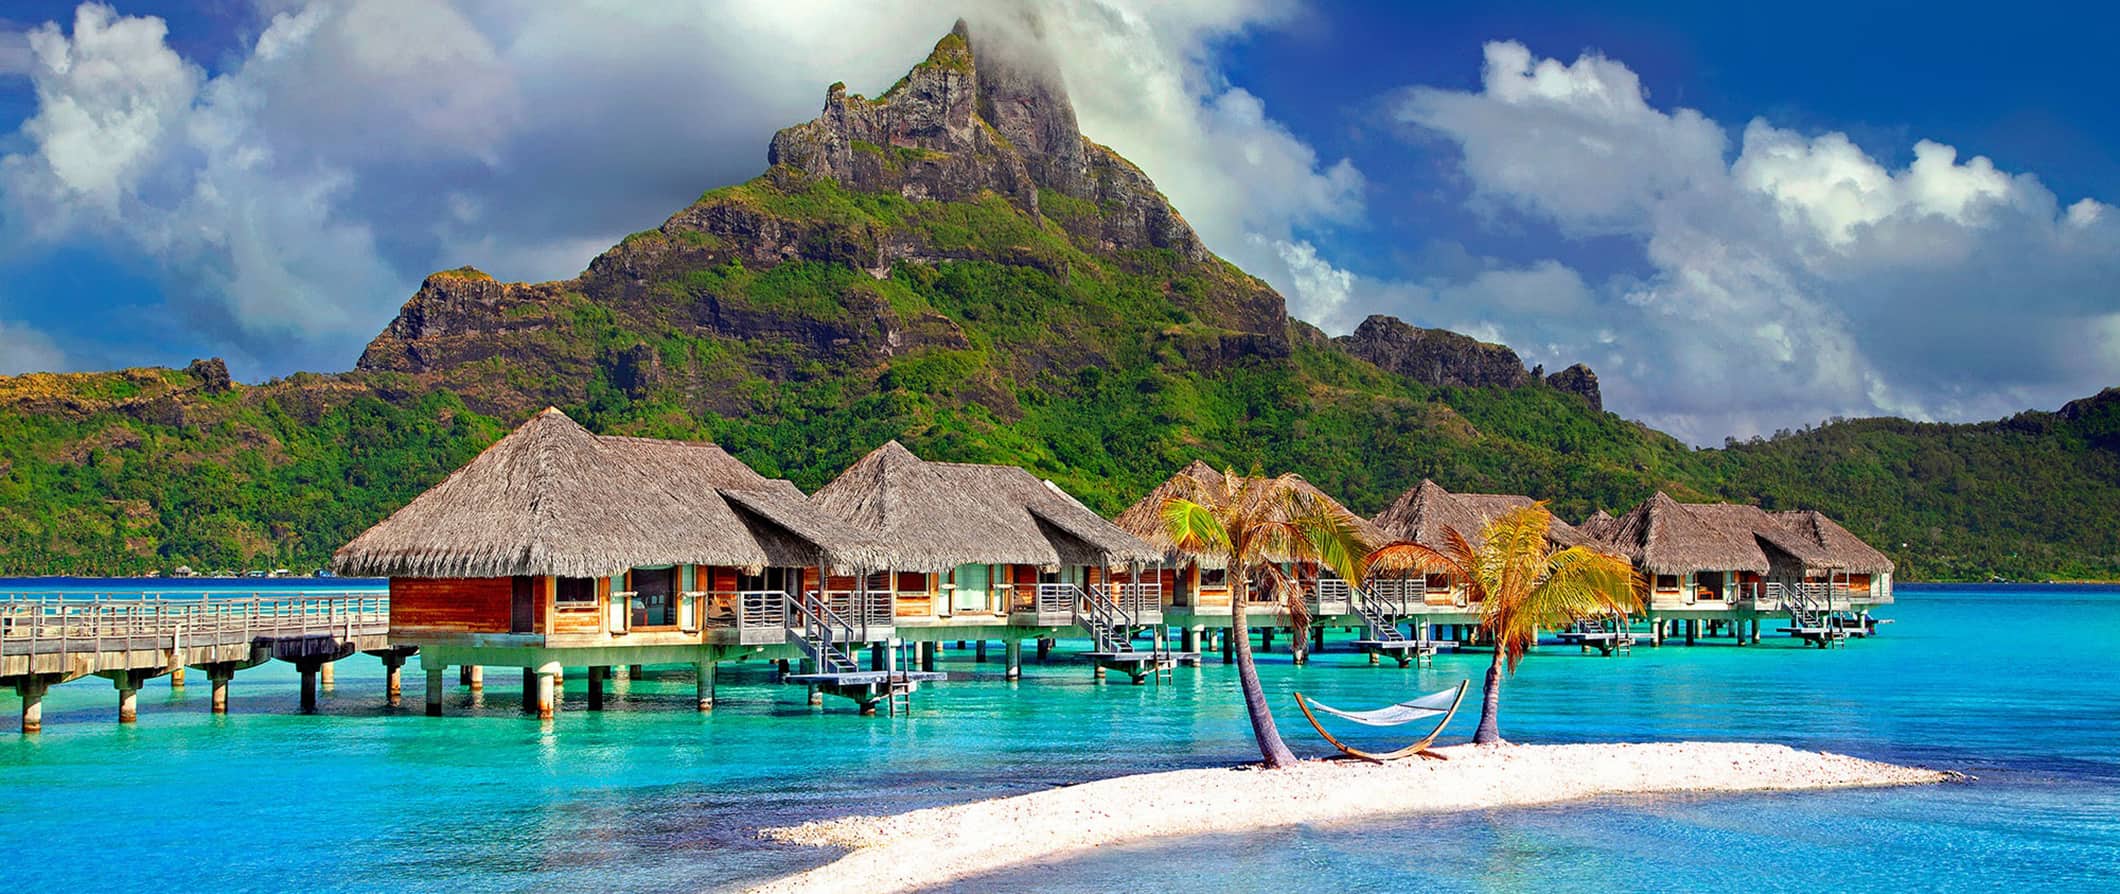 Overwater bungalows and clear waters at a picturesque beach in beautiful French Polynesia